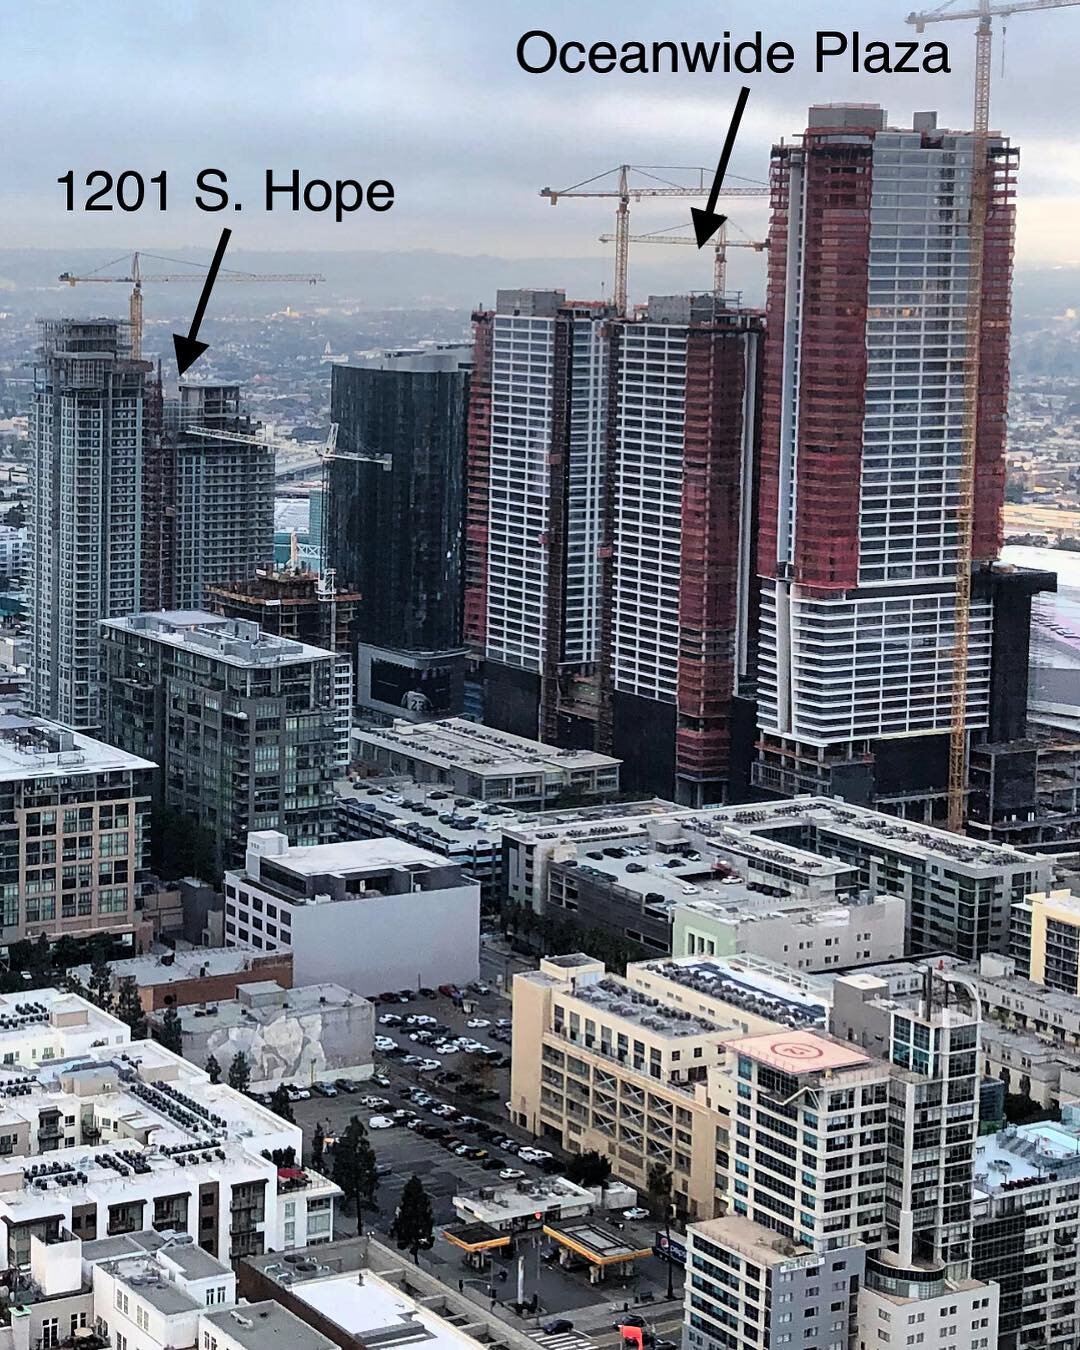 Special inspections today at 825 S. Hill has a great view of our two other projects! Happy building, LA!
.
.
.
.
#la #landscapephotography #losangeles #losangelesbuildings #labuildings #laconstruction #specialinspection #smokecontrol #codeconsulting 